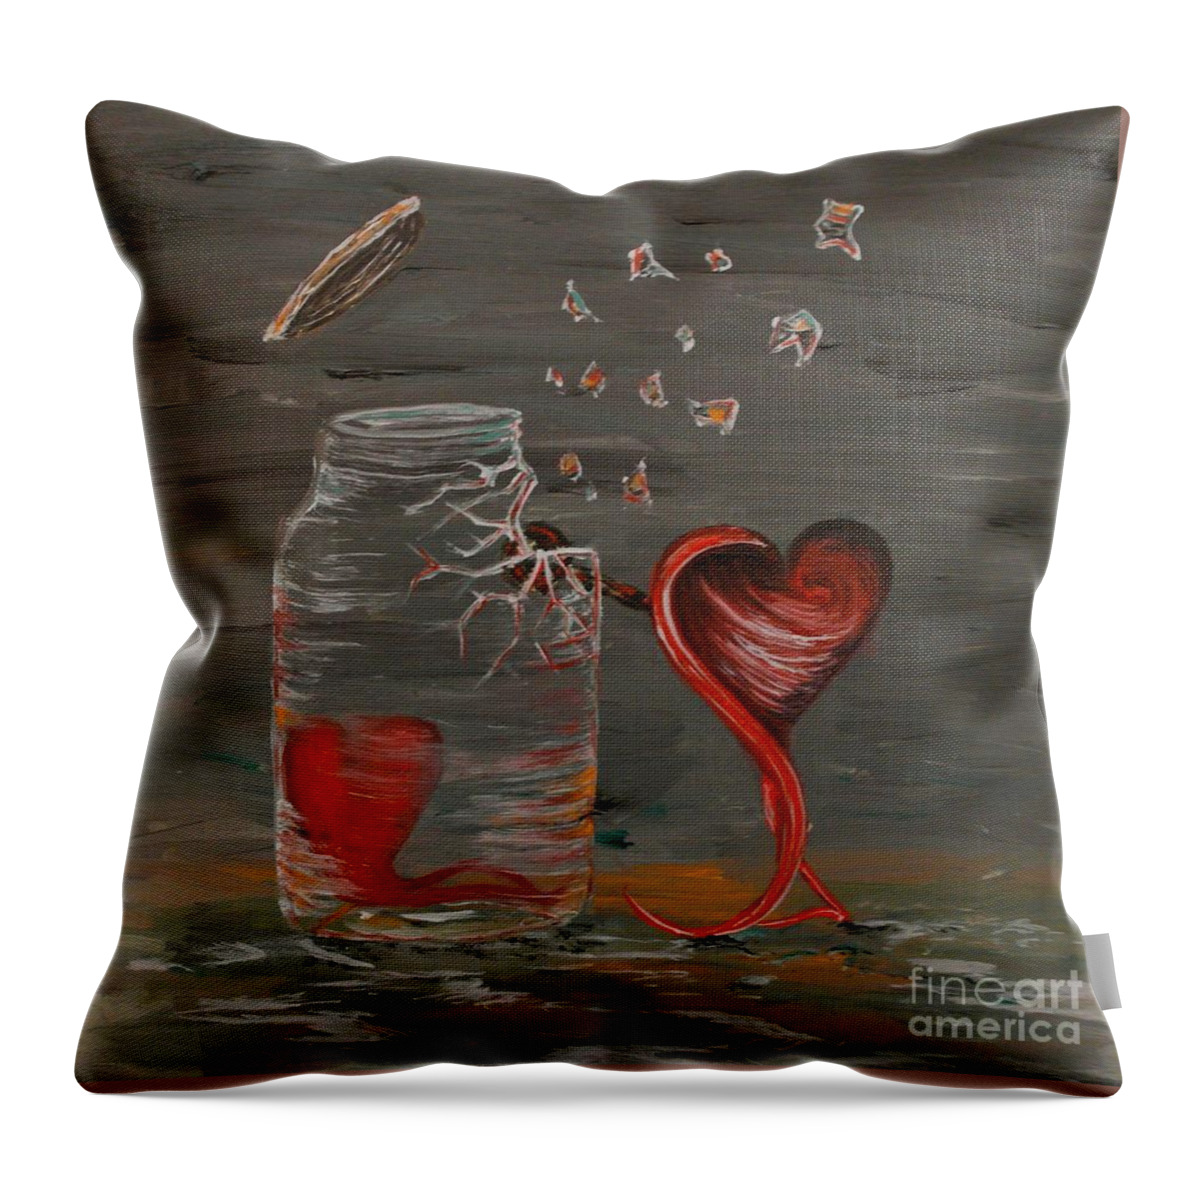 Abstract Throw Pillow featuring the painting I Wanna Be Your Sledge Hammer by Wayne Cantrell